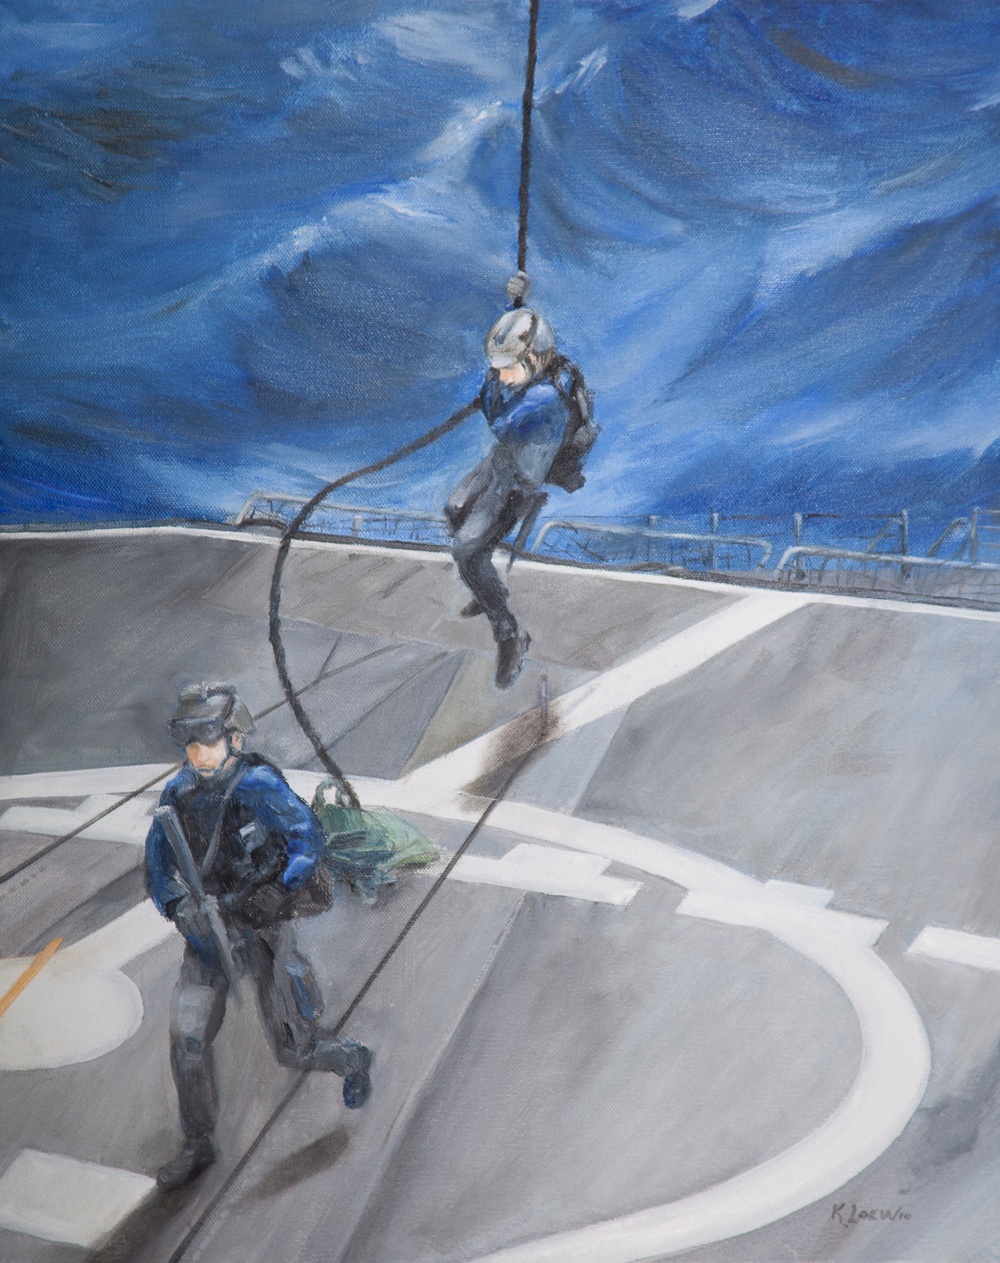 US Coast Guard Art Program 2010 Collection, Ob ID # 201022, &quot;Vertical insertion on the USS Cape St. George,&quot; Karen Loew (22 of 41)